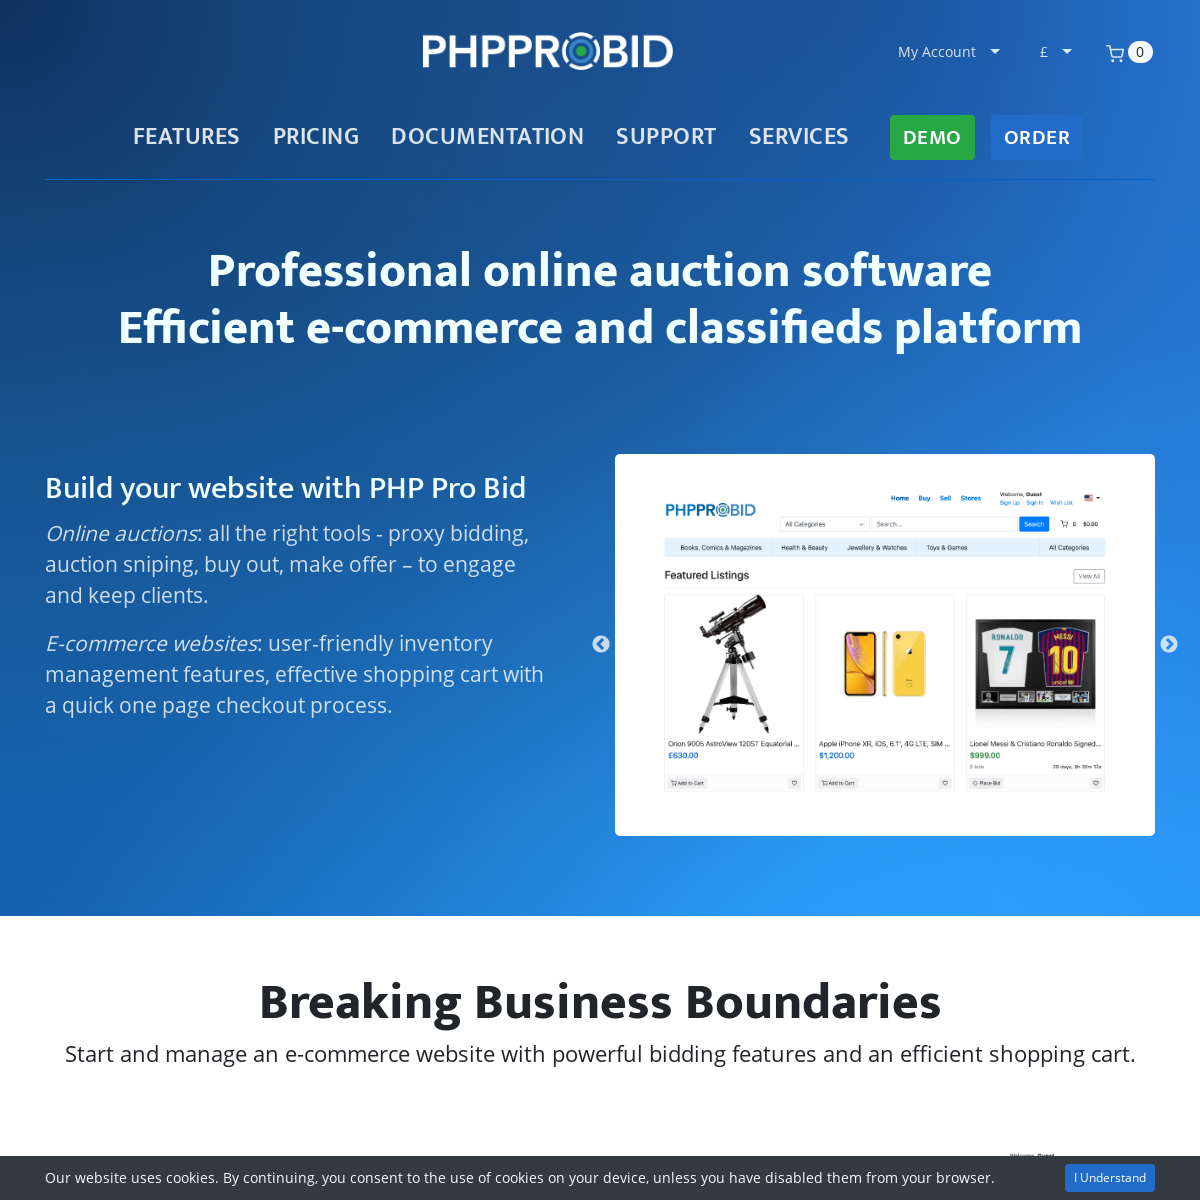 A complete backup of phpprobid.com